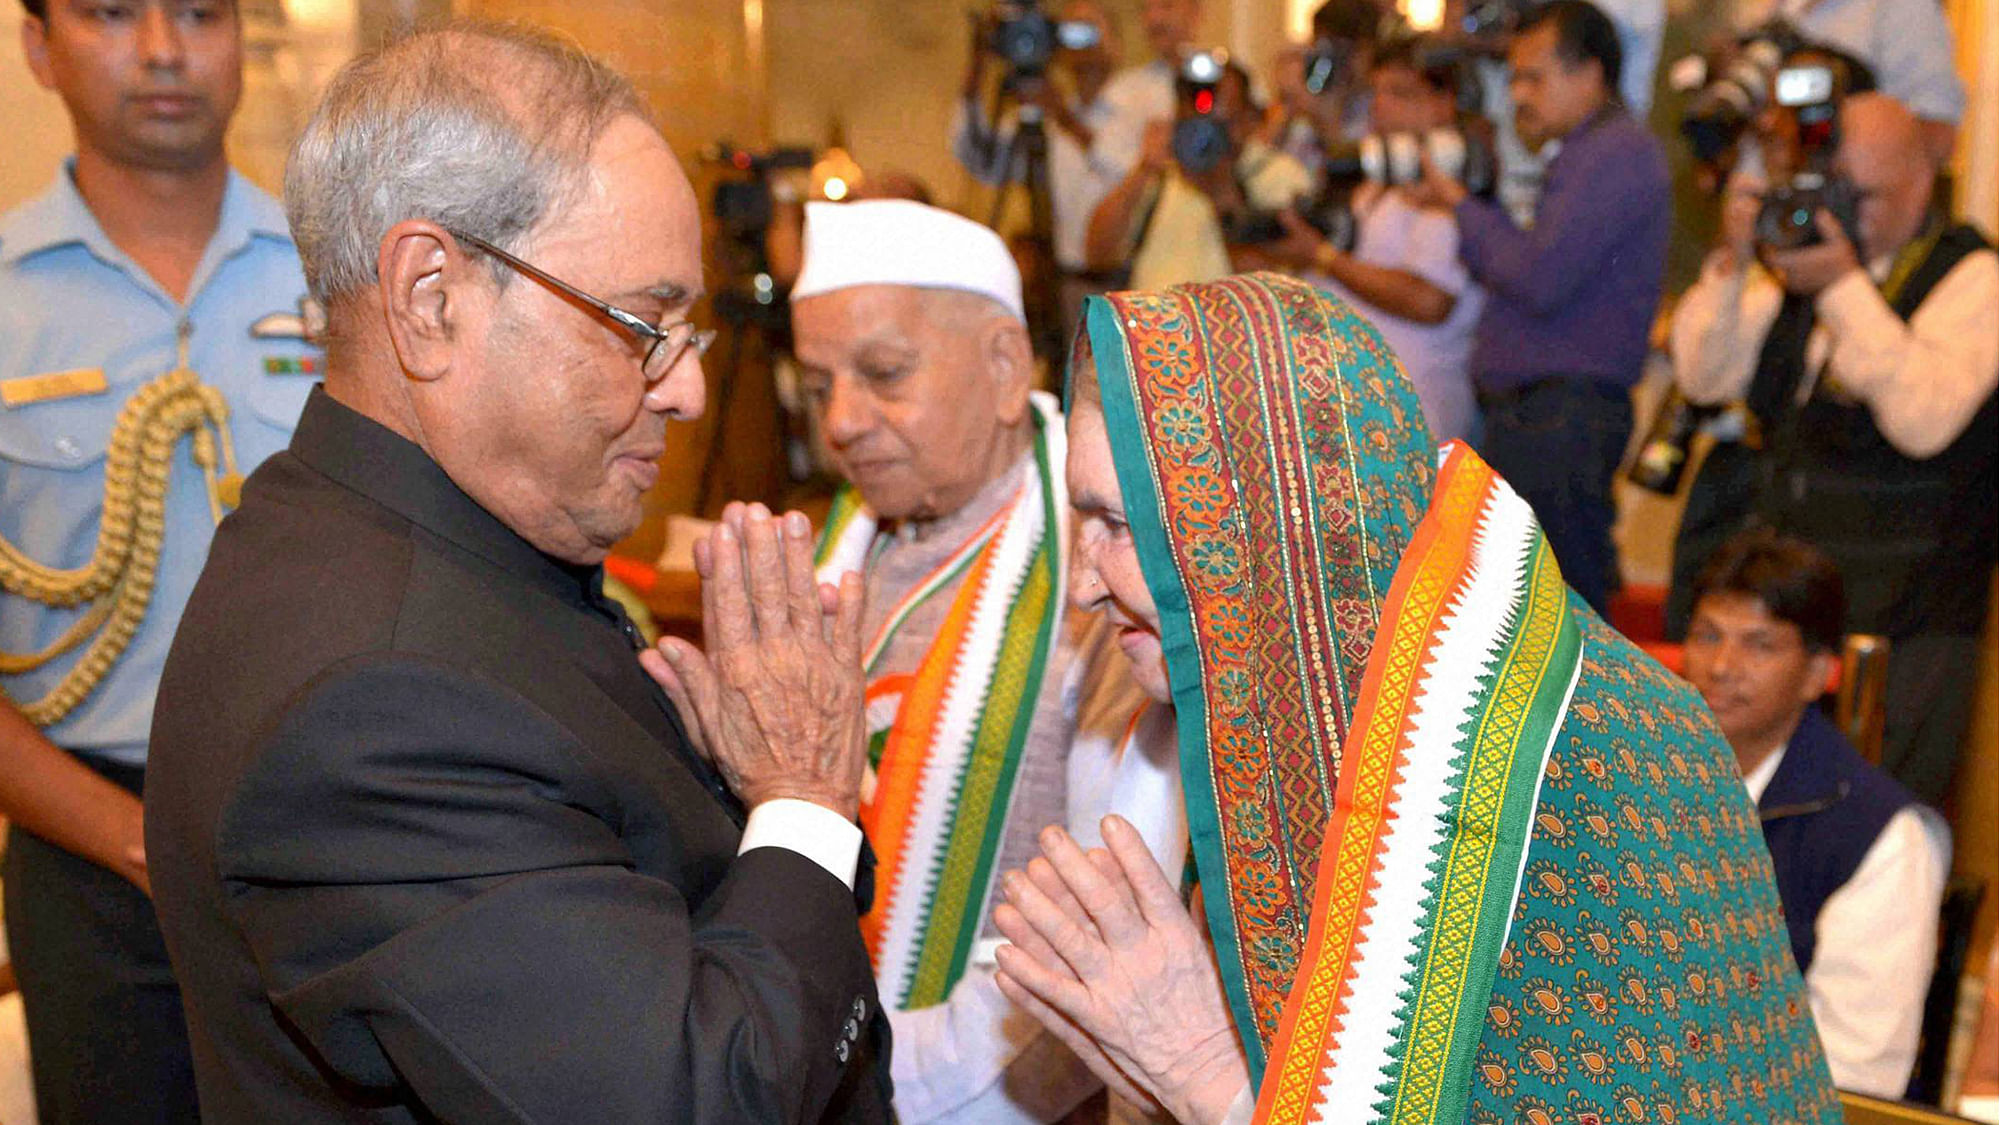 President Pranab Mukherjee meets freedom fighters at a reception on the occasion of the 74th anniversary of the Quit India Movement at Rashtrapati Bhavan in New Delhi on Tuesday. (Photo: PTI)